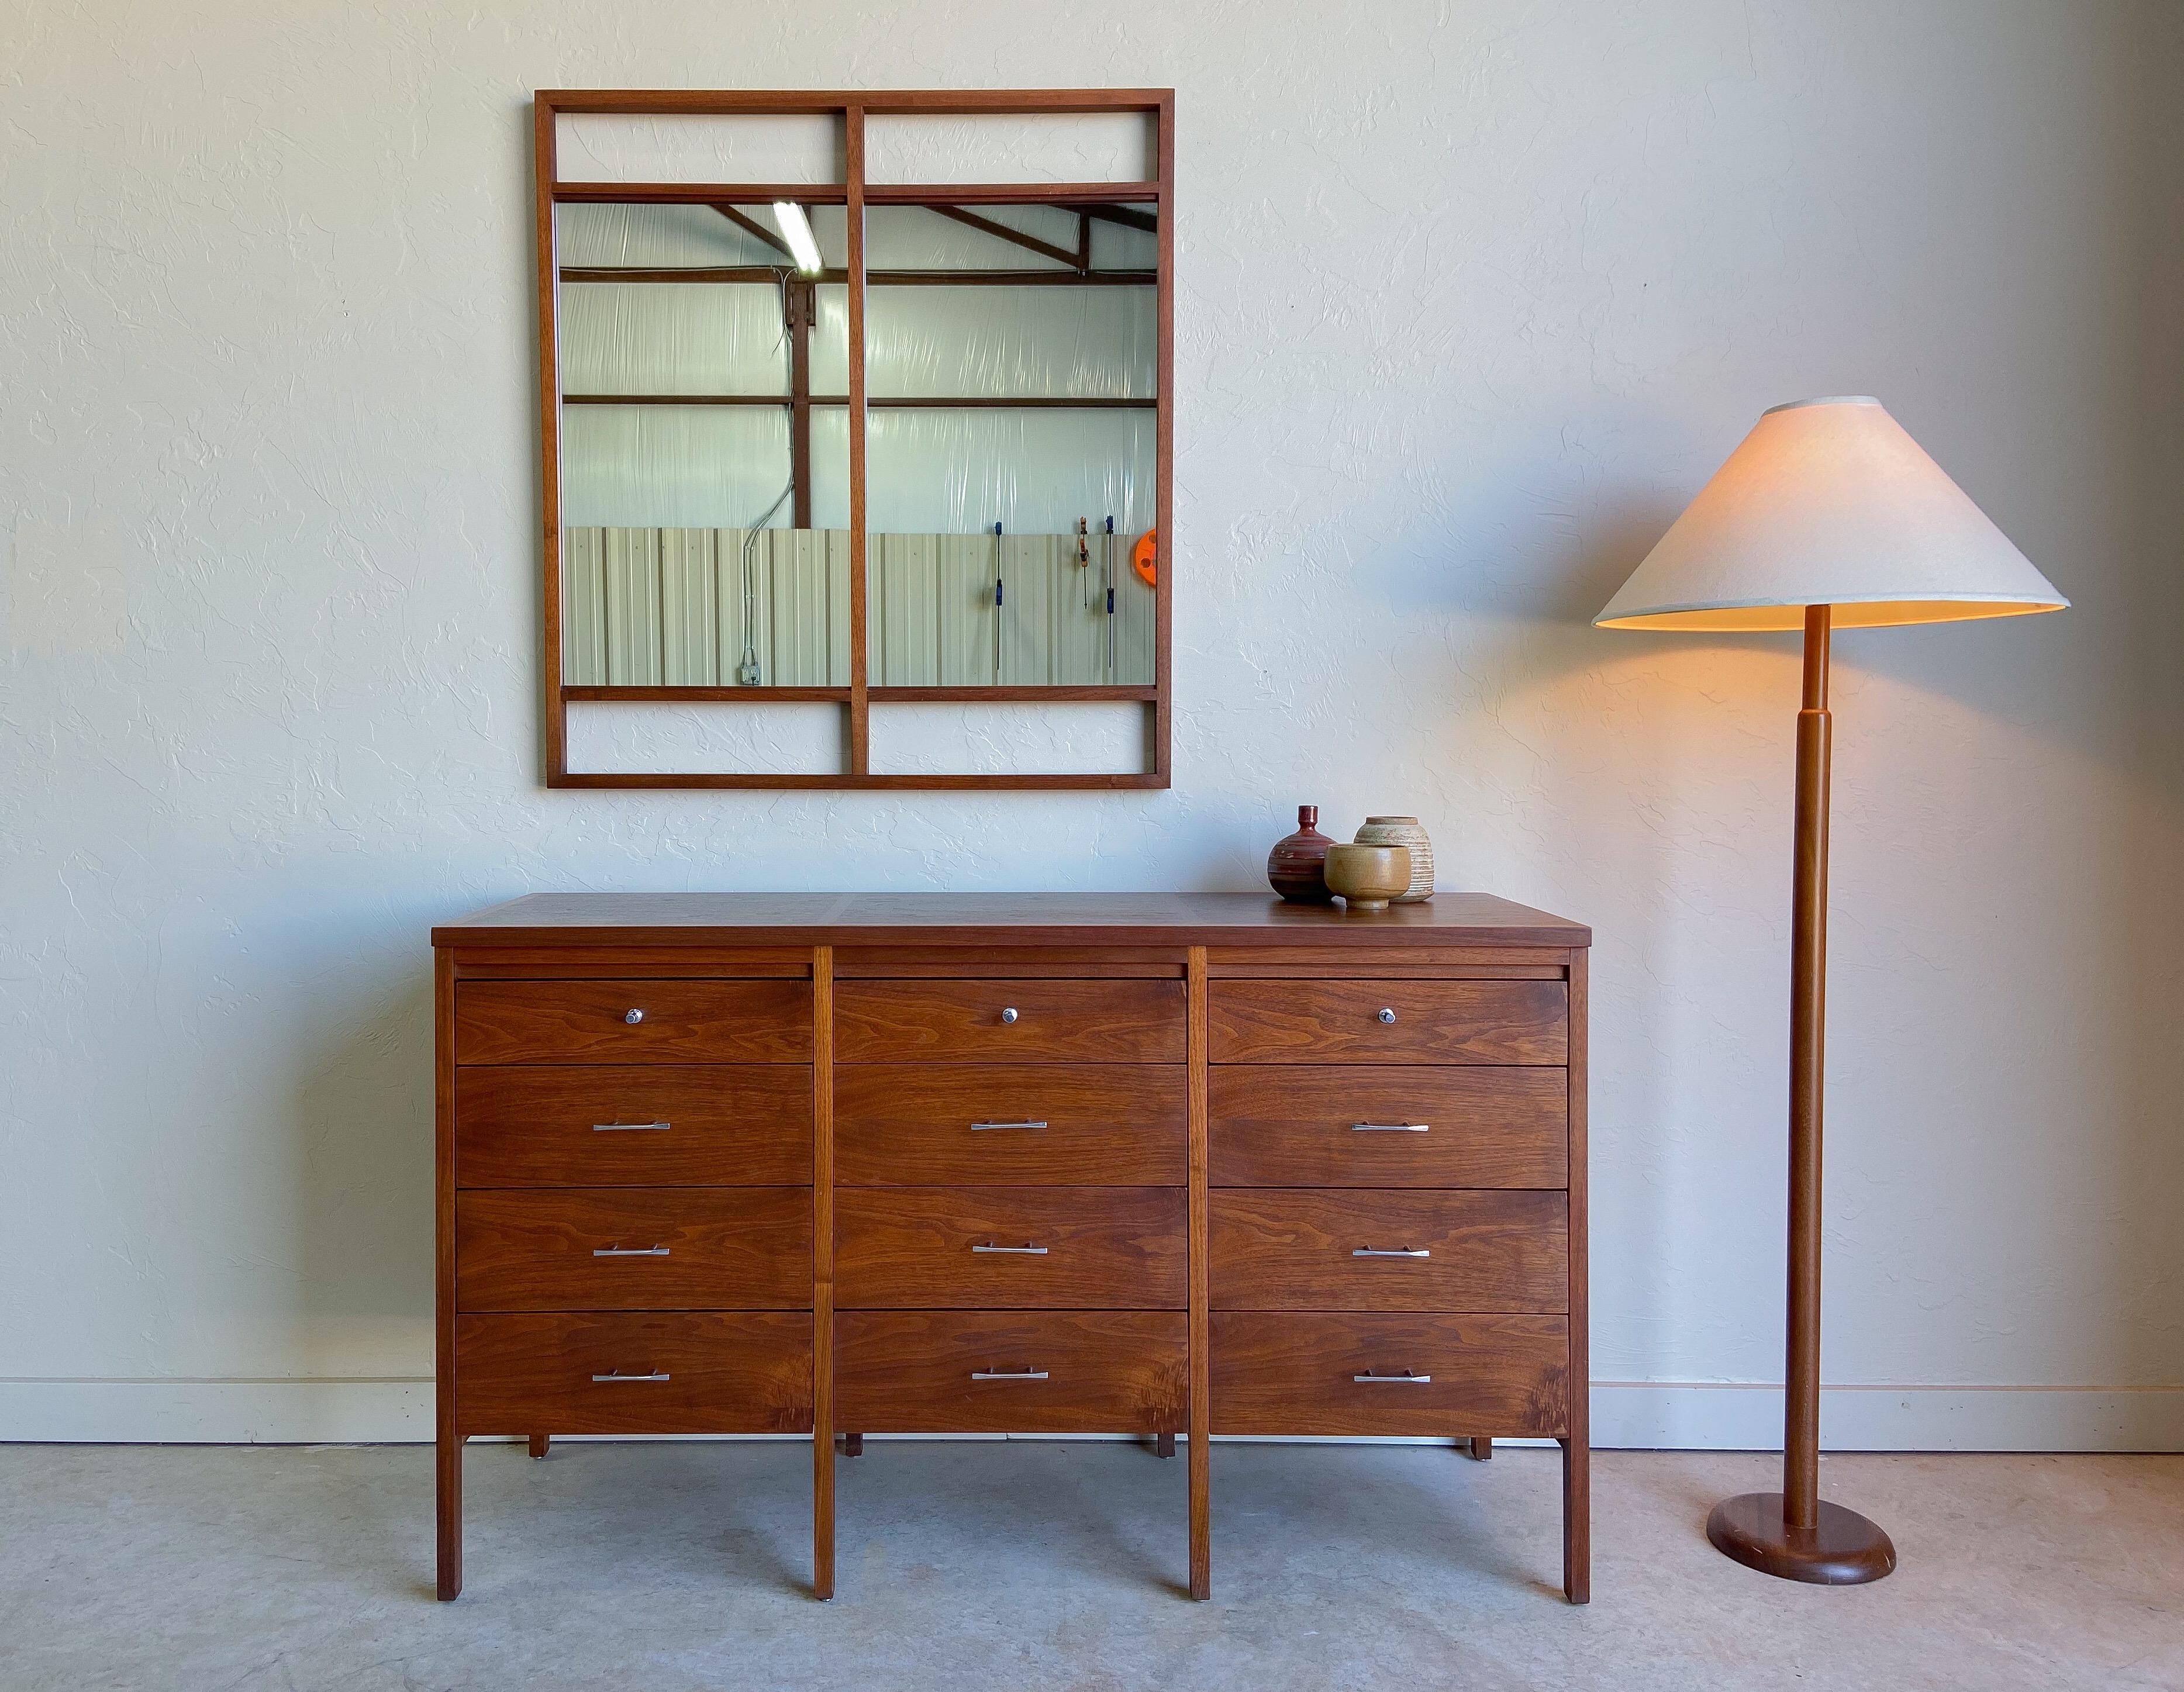 A beautiful twelve drawer dresser designed by Paul McCobb for Lane. Designed as part of McCobb’s “Delineator” series, this dresser features stunning architectural lines. 

Comprised of both solid walnut and beautiful bookmatched walnut veneer.